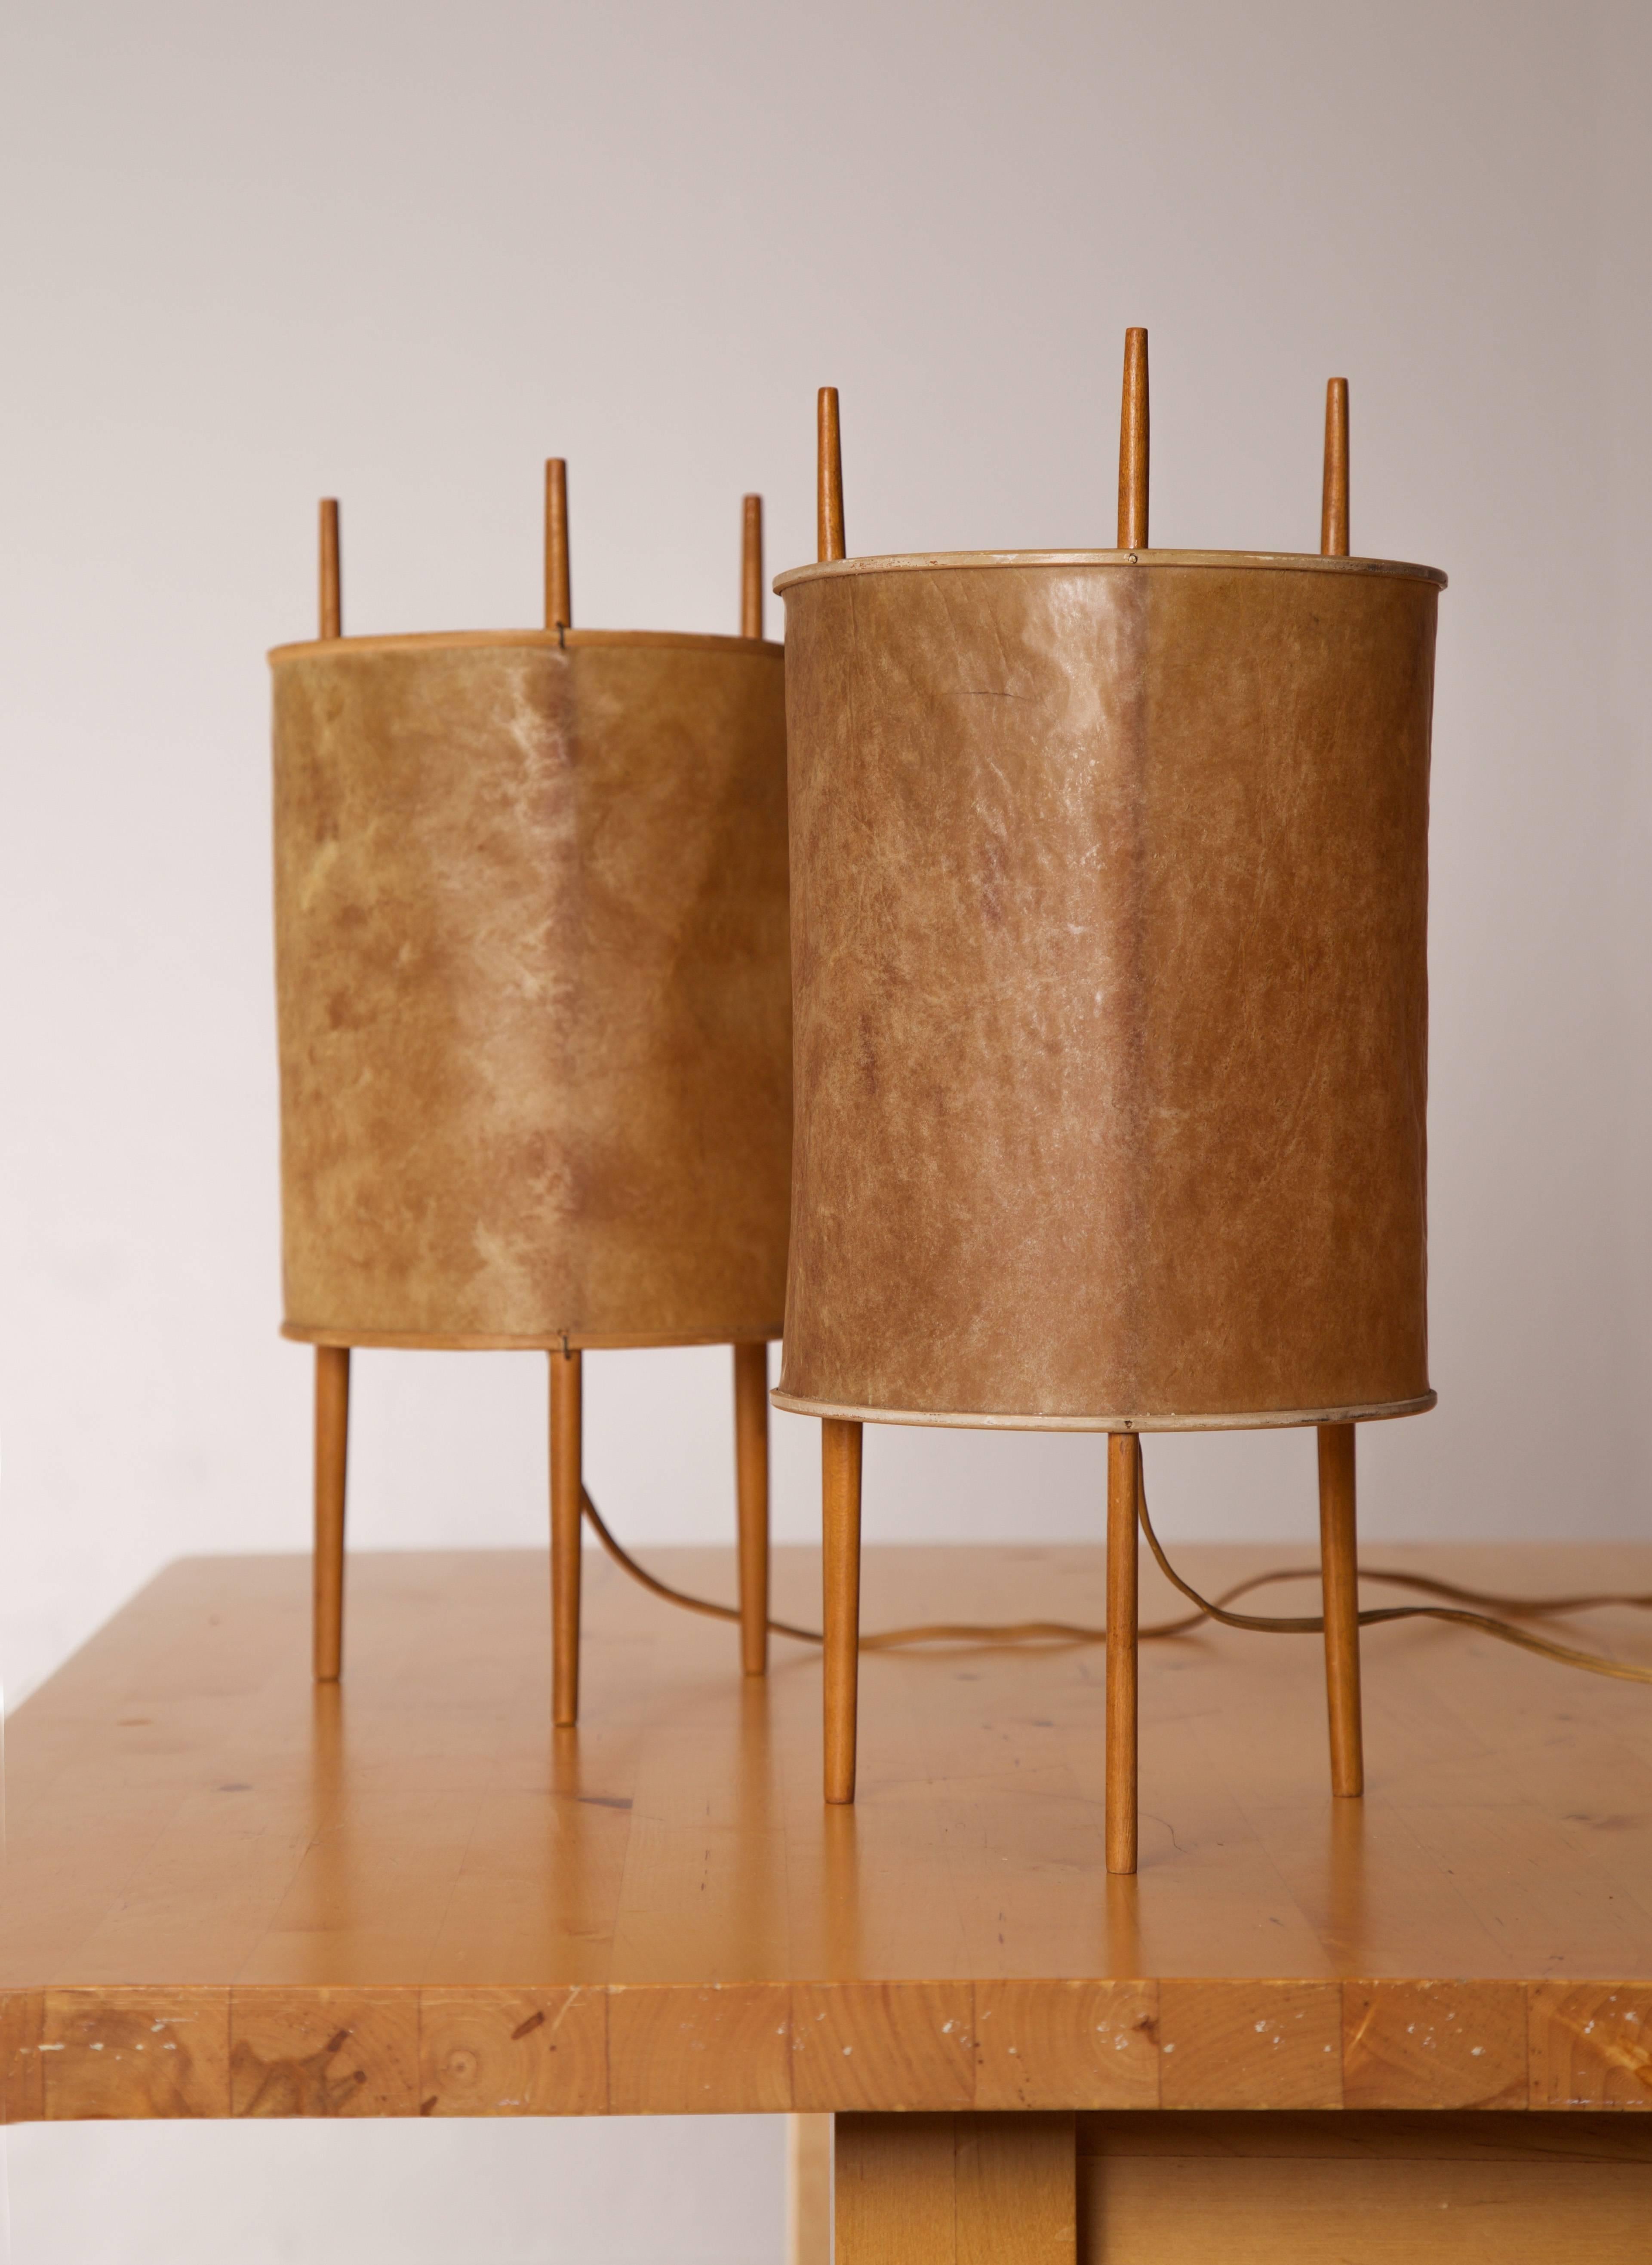 Metal Isamu Noguchi, Early Pair of Table Lamps, All Original, by Knoll, 1947